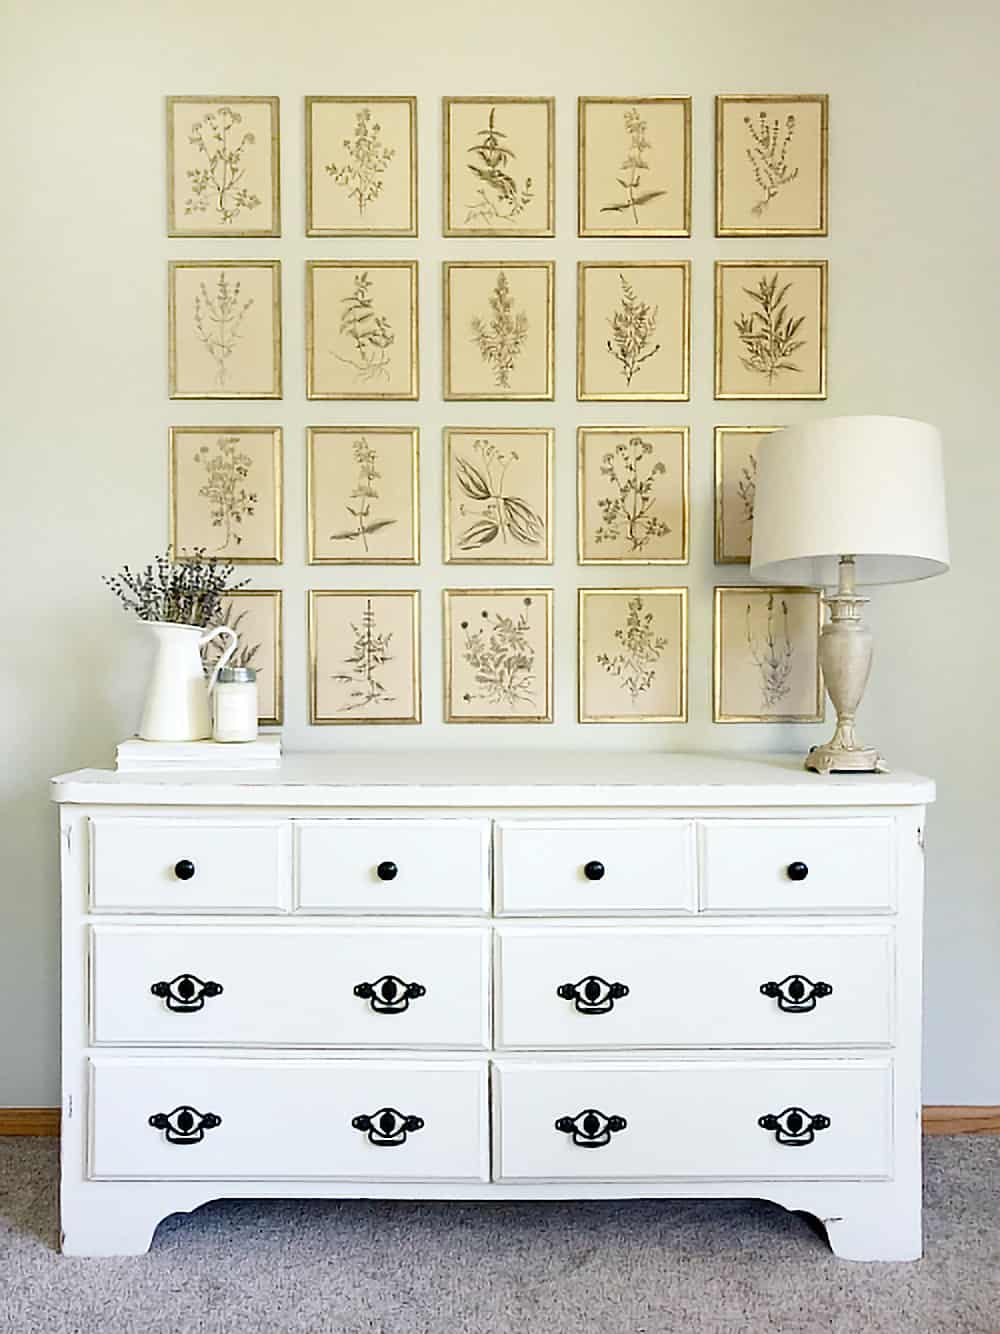 White dresser with black drawer pulls and a gallery of antique prints above.